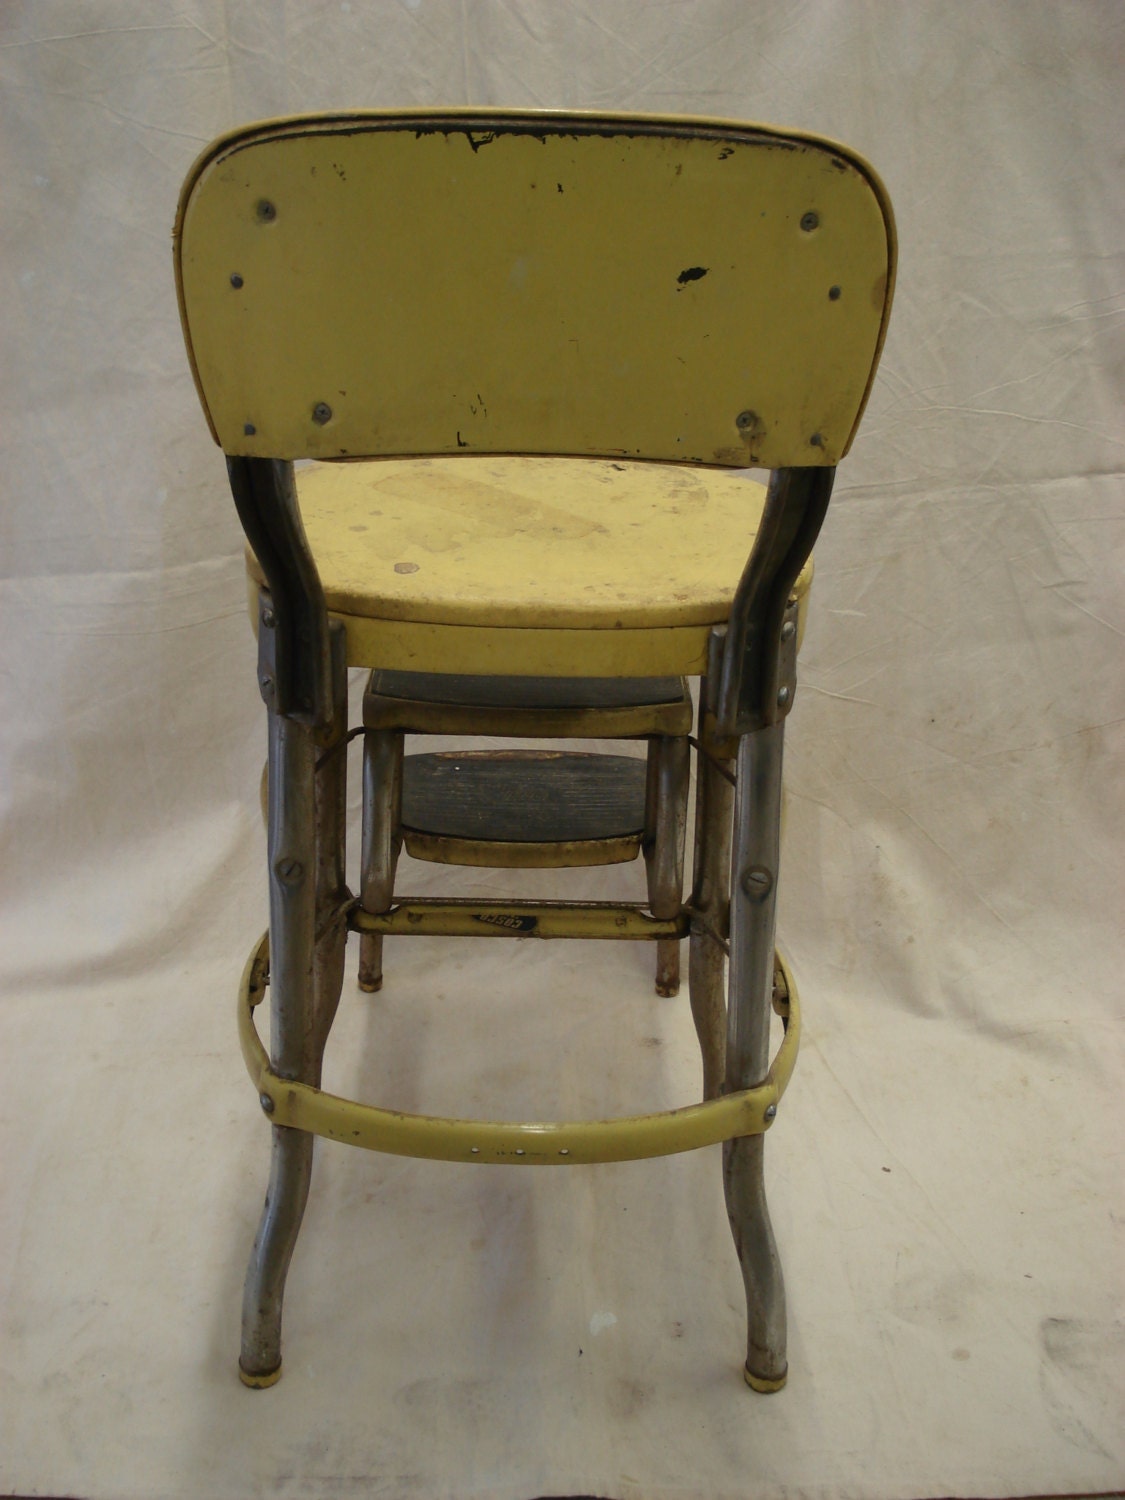 Vintage metal YELLOW Folding Costco Chair Step Stool fold out